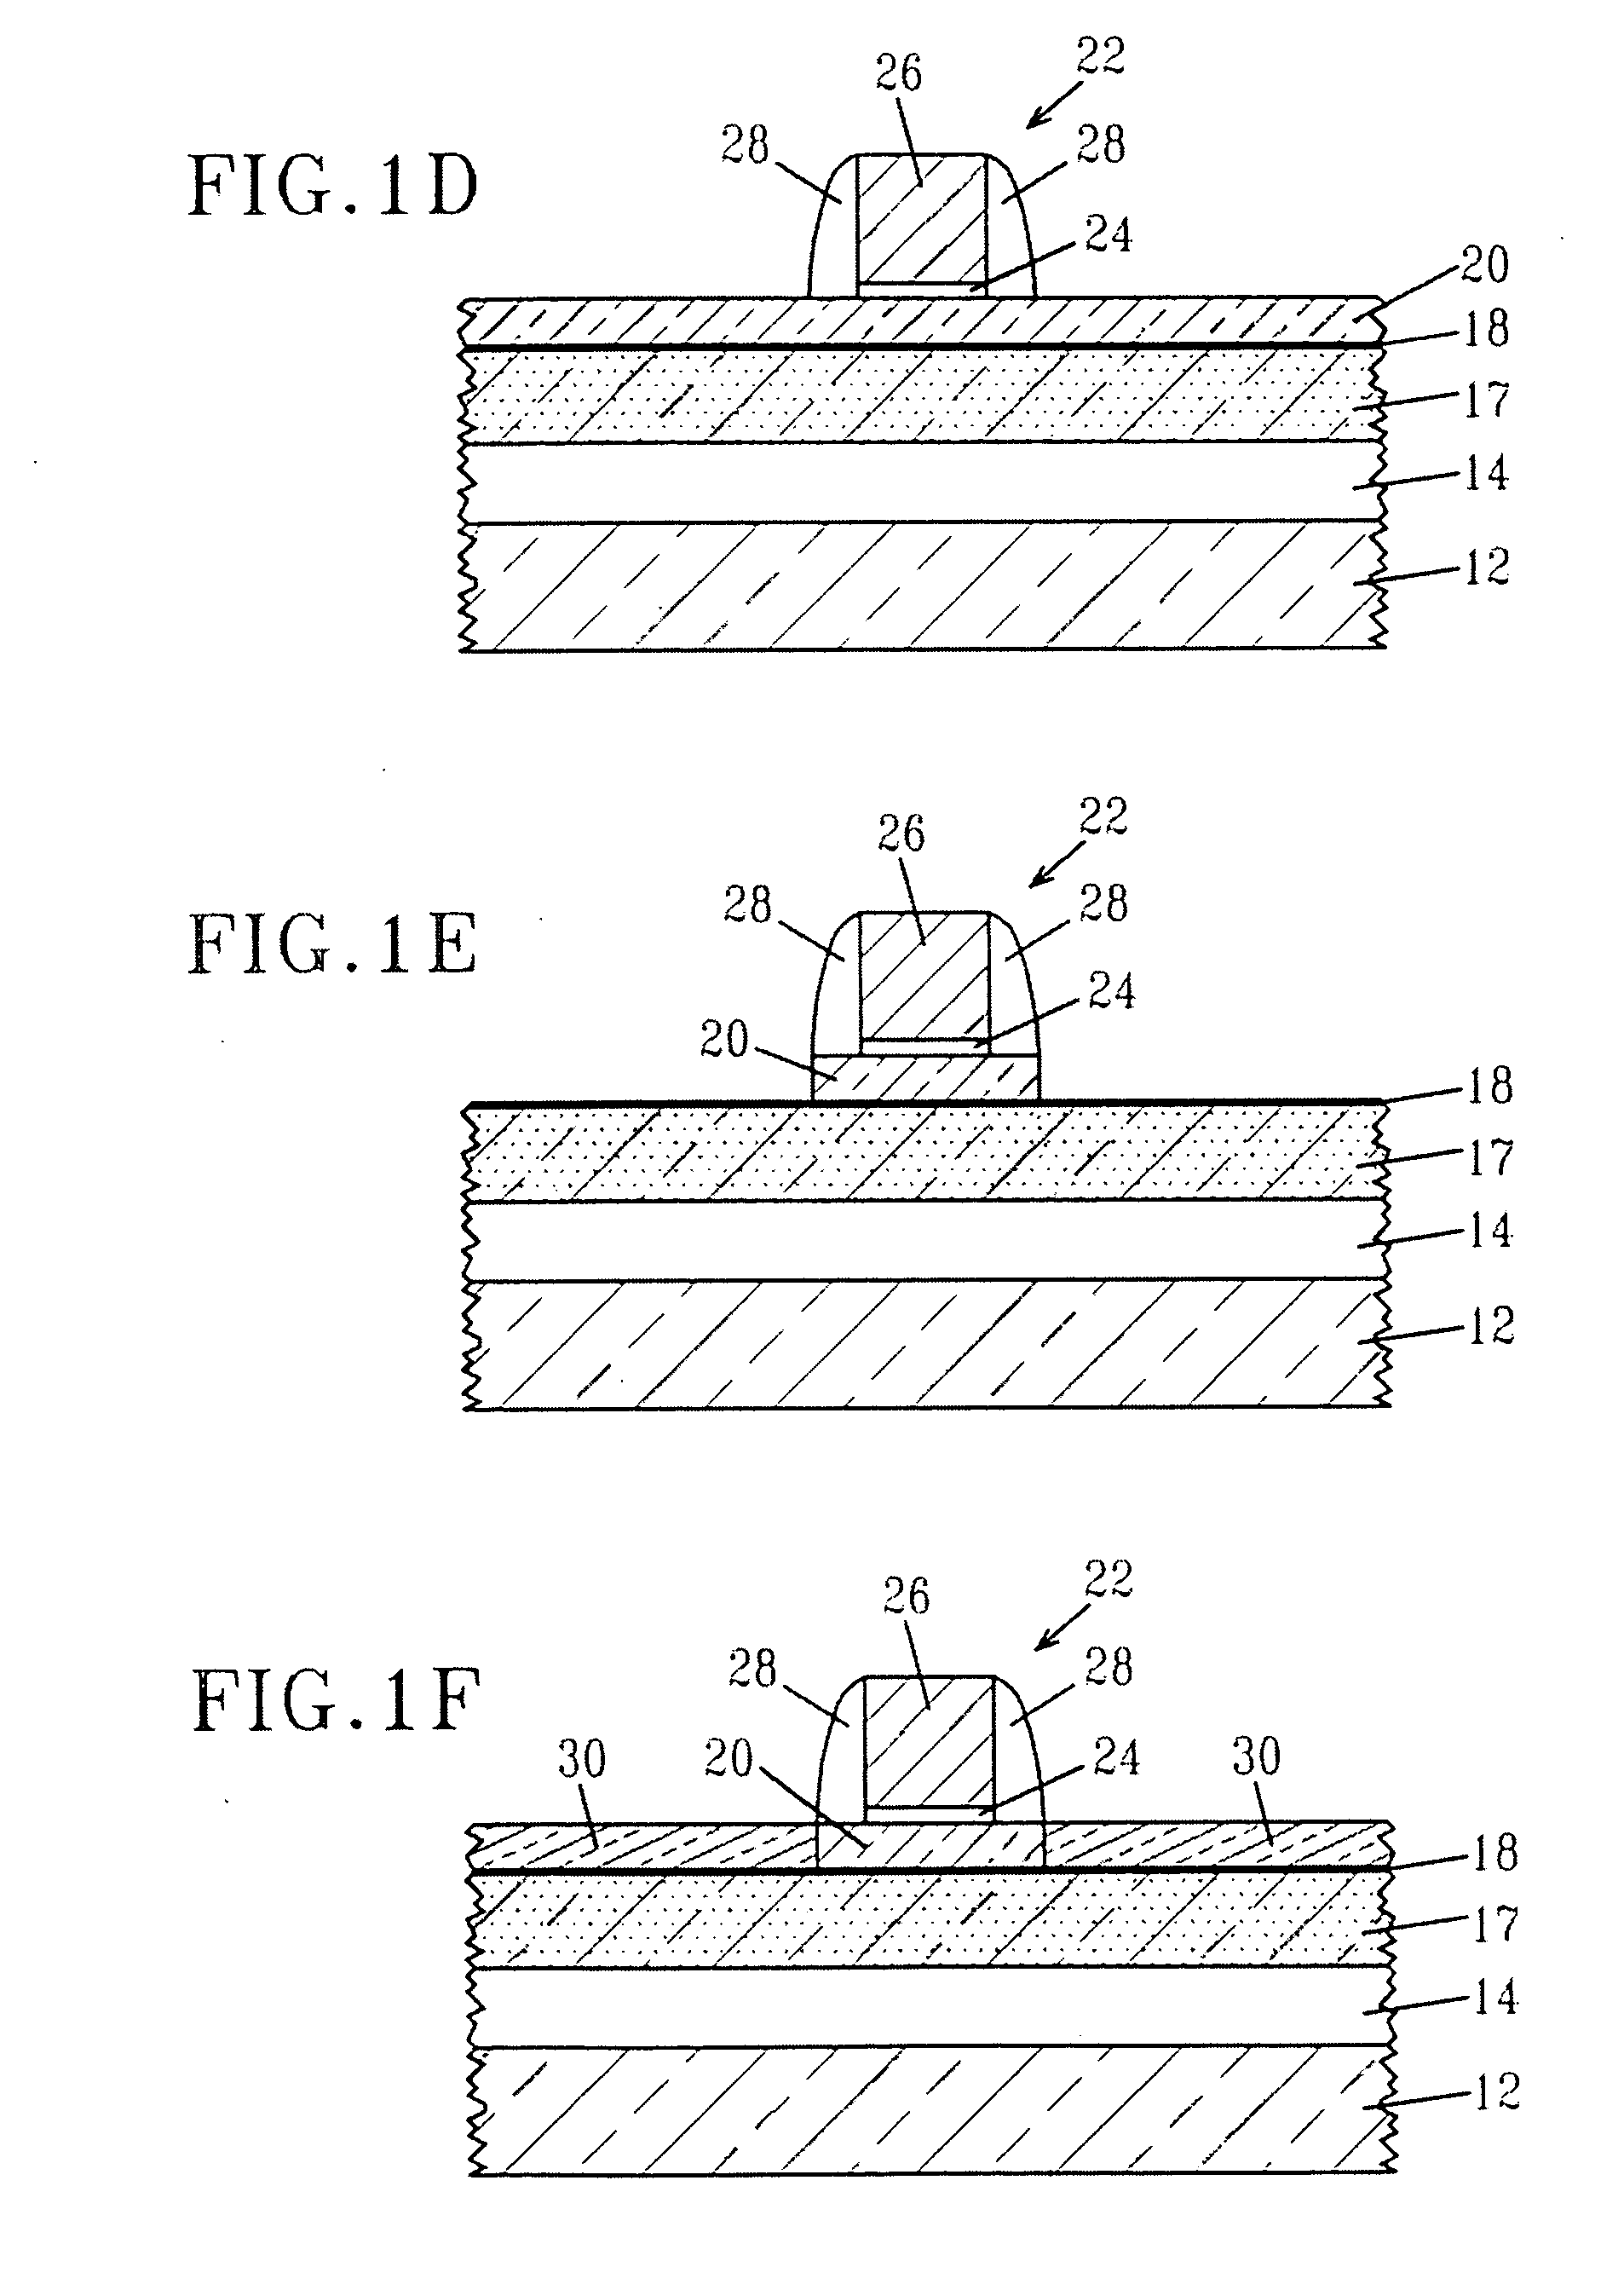 Manufacturable recessed strained RSD structure and process for advanced CMOS